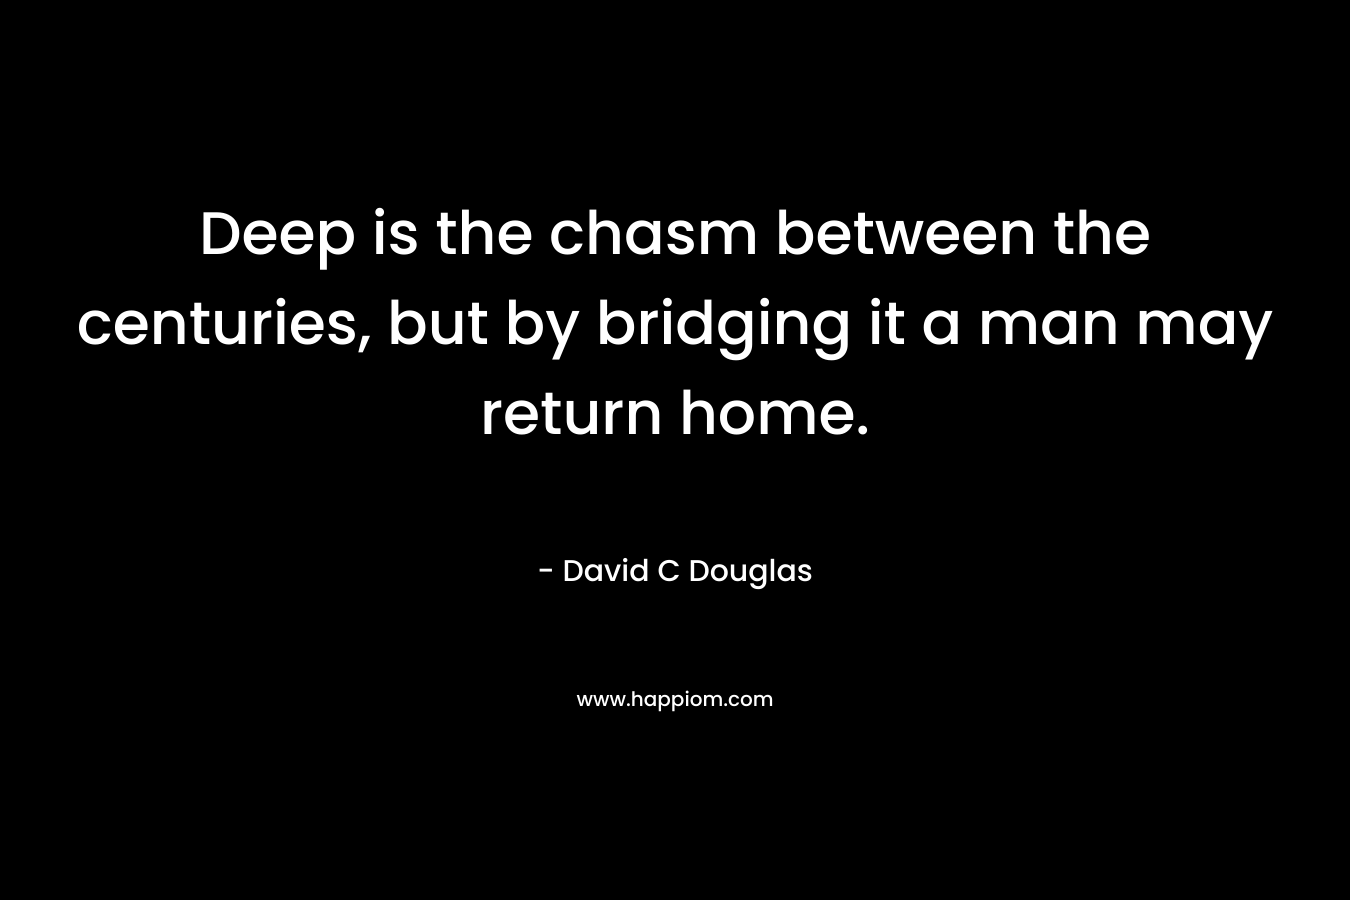 Deep is the chasm between the centuries, but by bridging it a man may return home. – David C Douglas